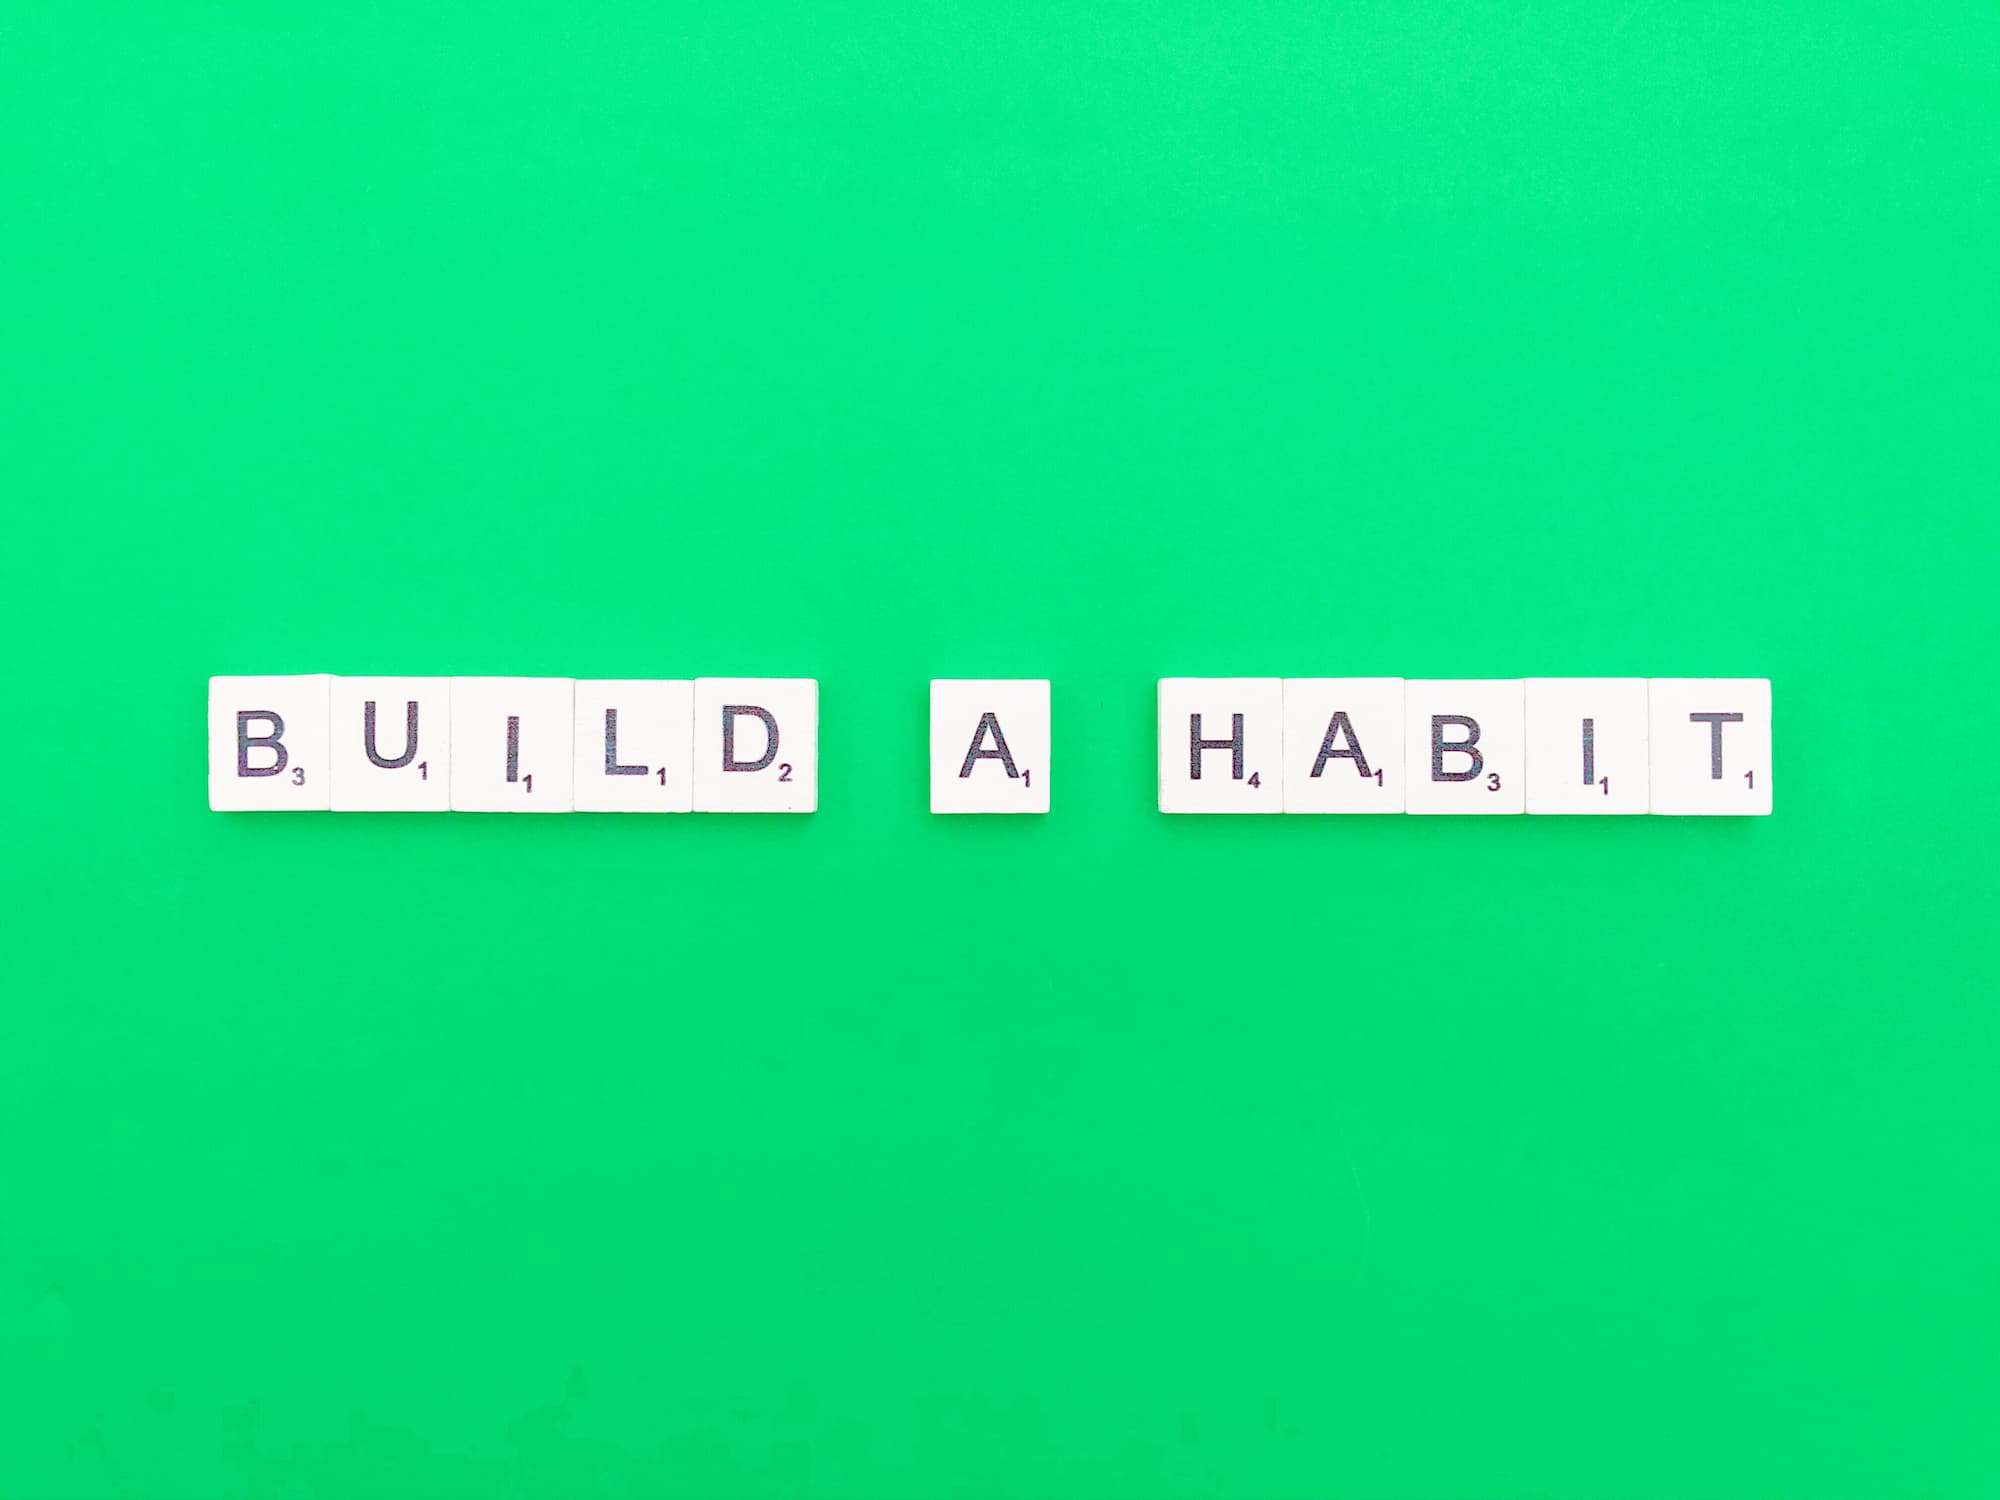 How to Start Building Daily Habits for Your Health & Wellbeing